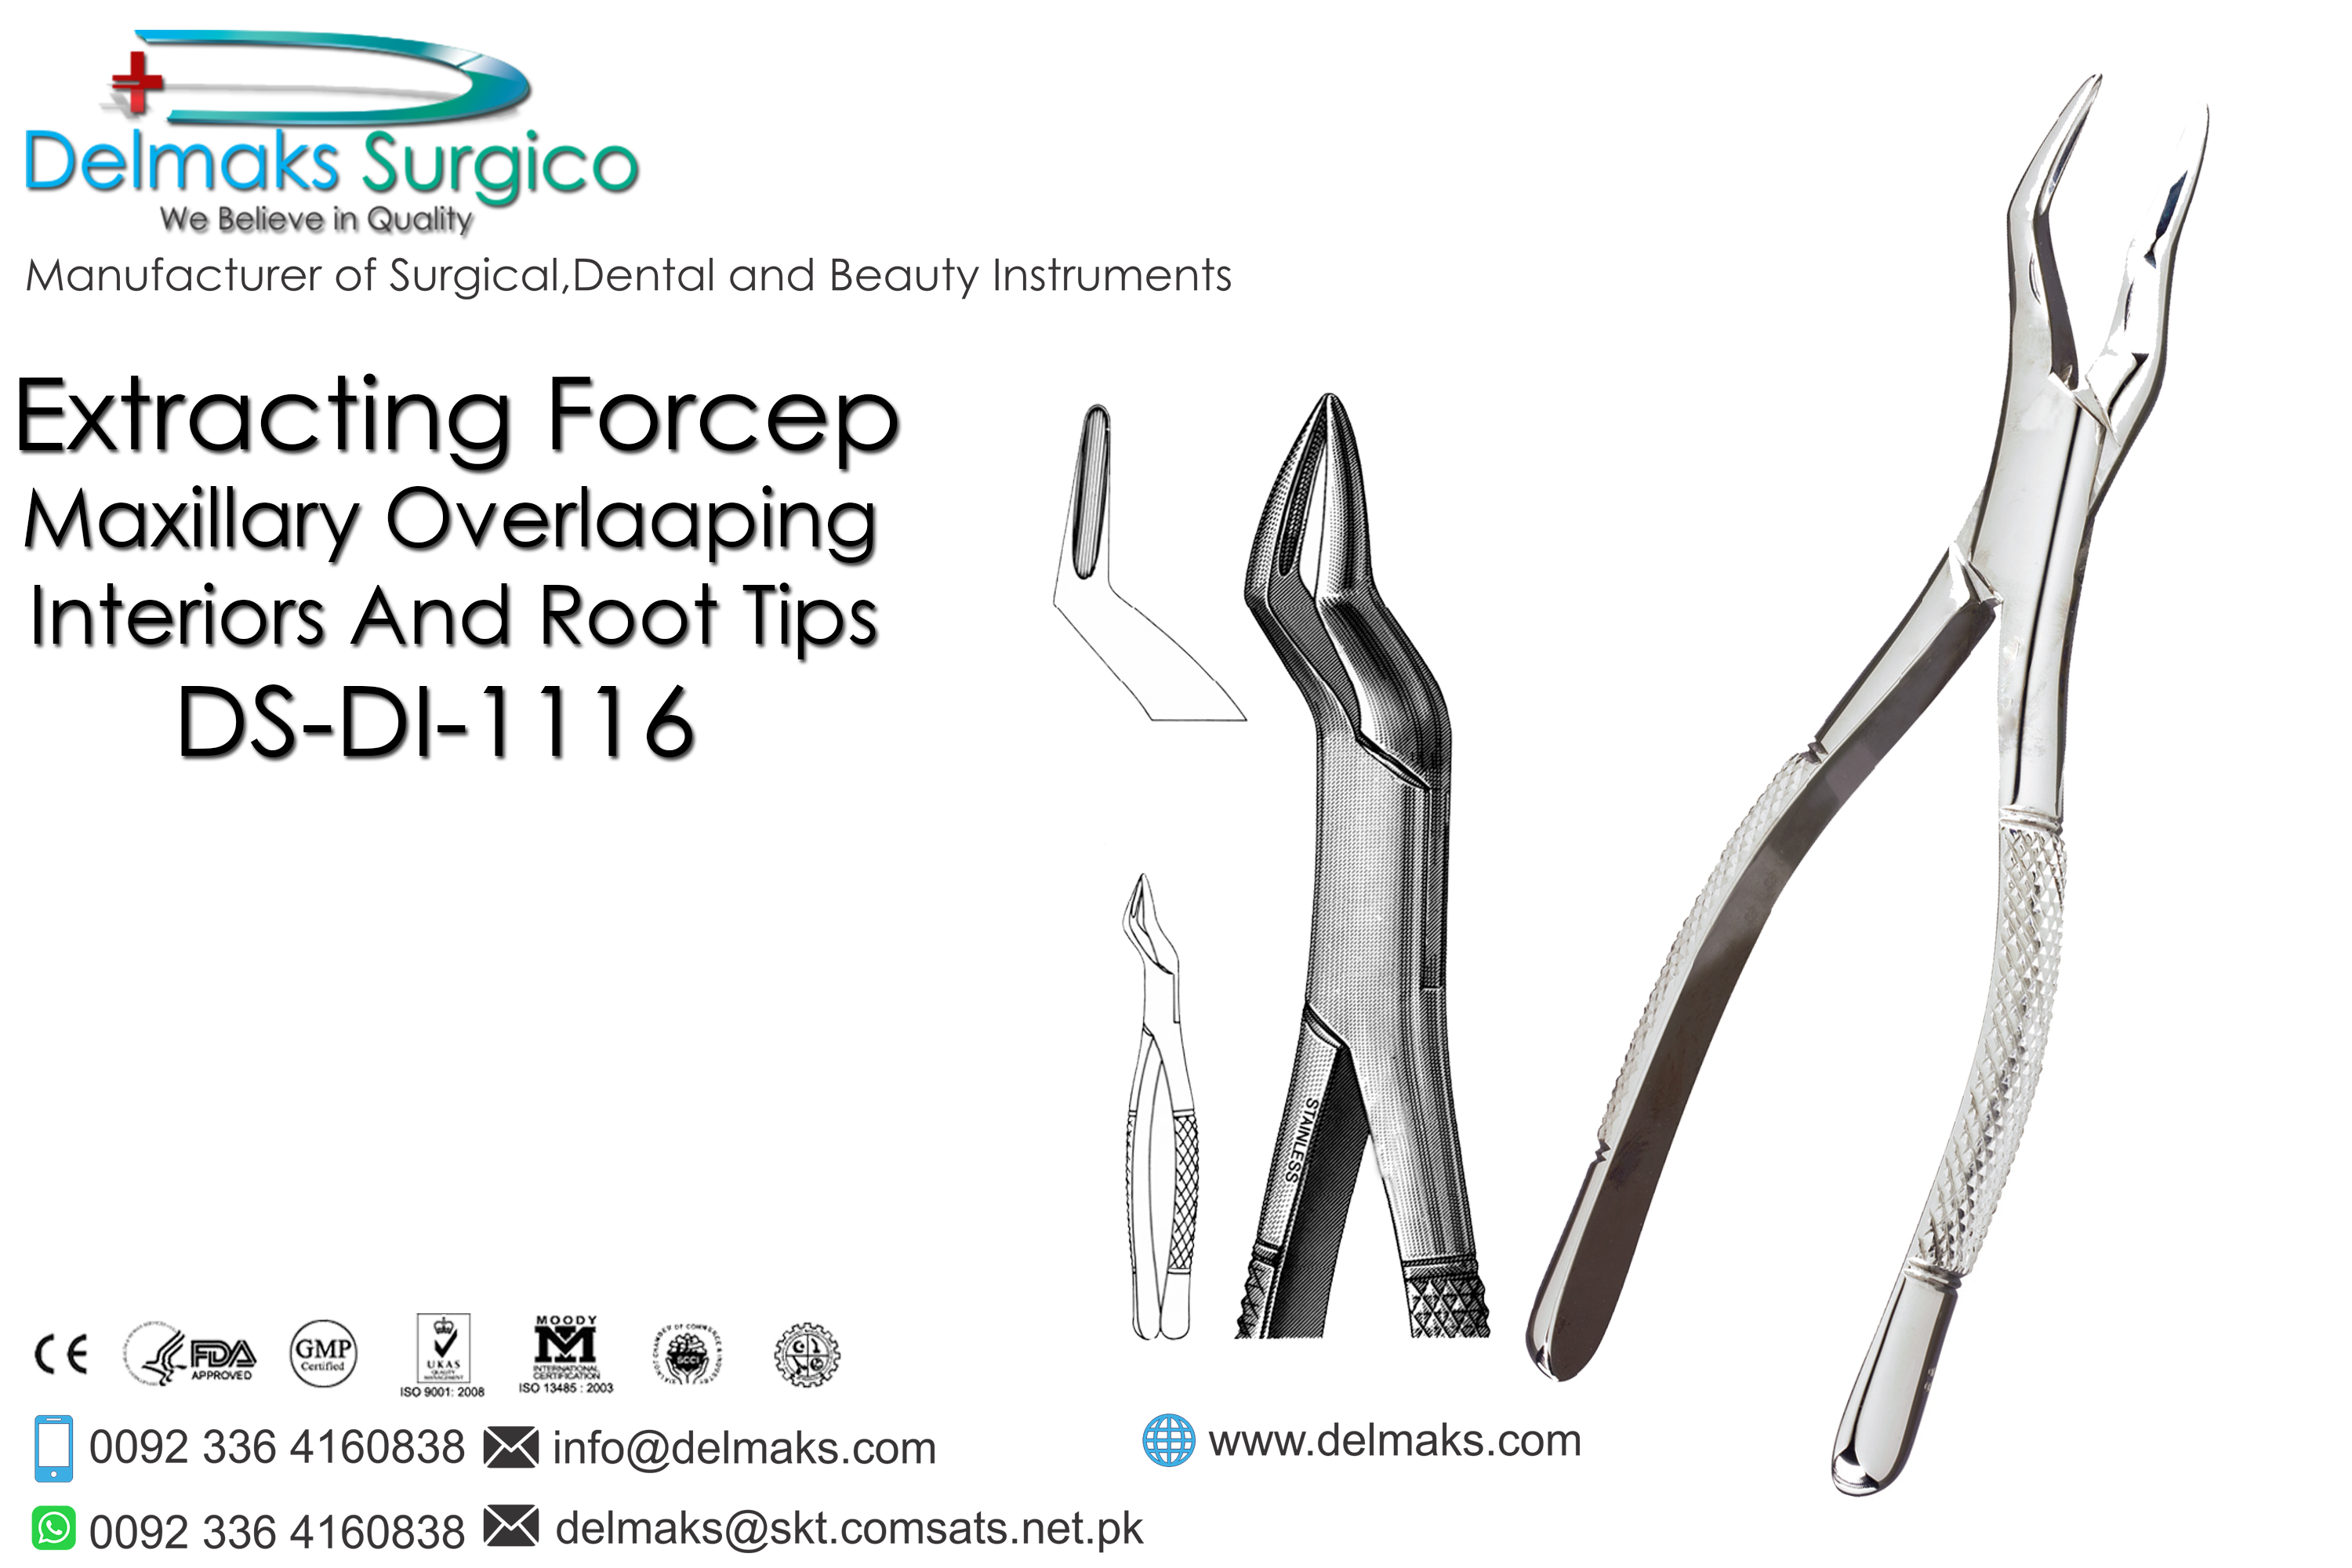 Extracting Forceps (Maxillary Overllaping Interiors And Root Tips)-Oral and Maxillofacial Surgery Instruments-Dental Instruments-Delmaks Surgico 